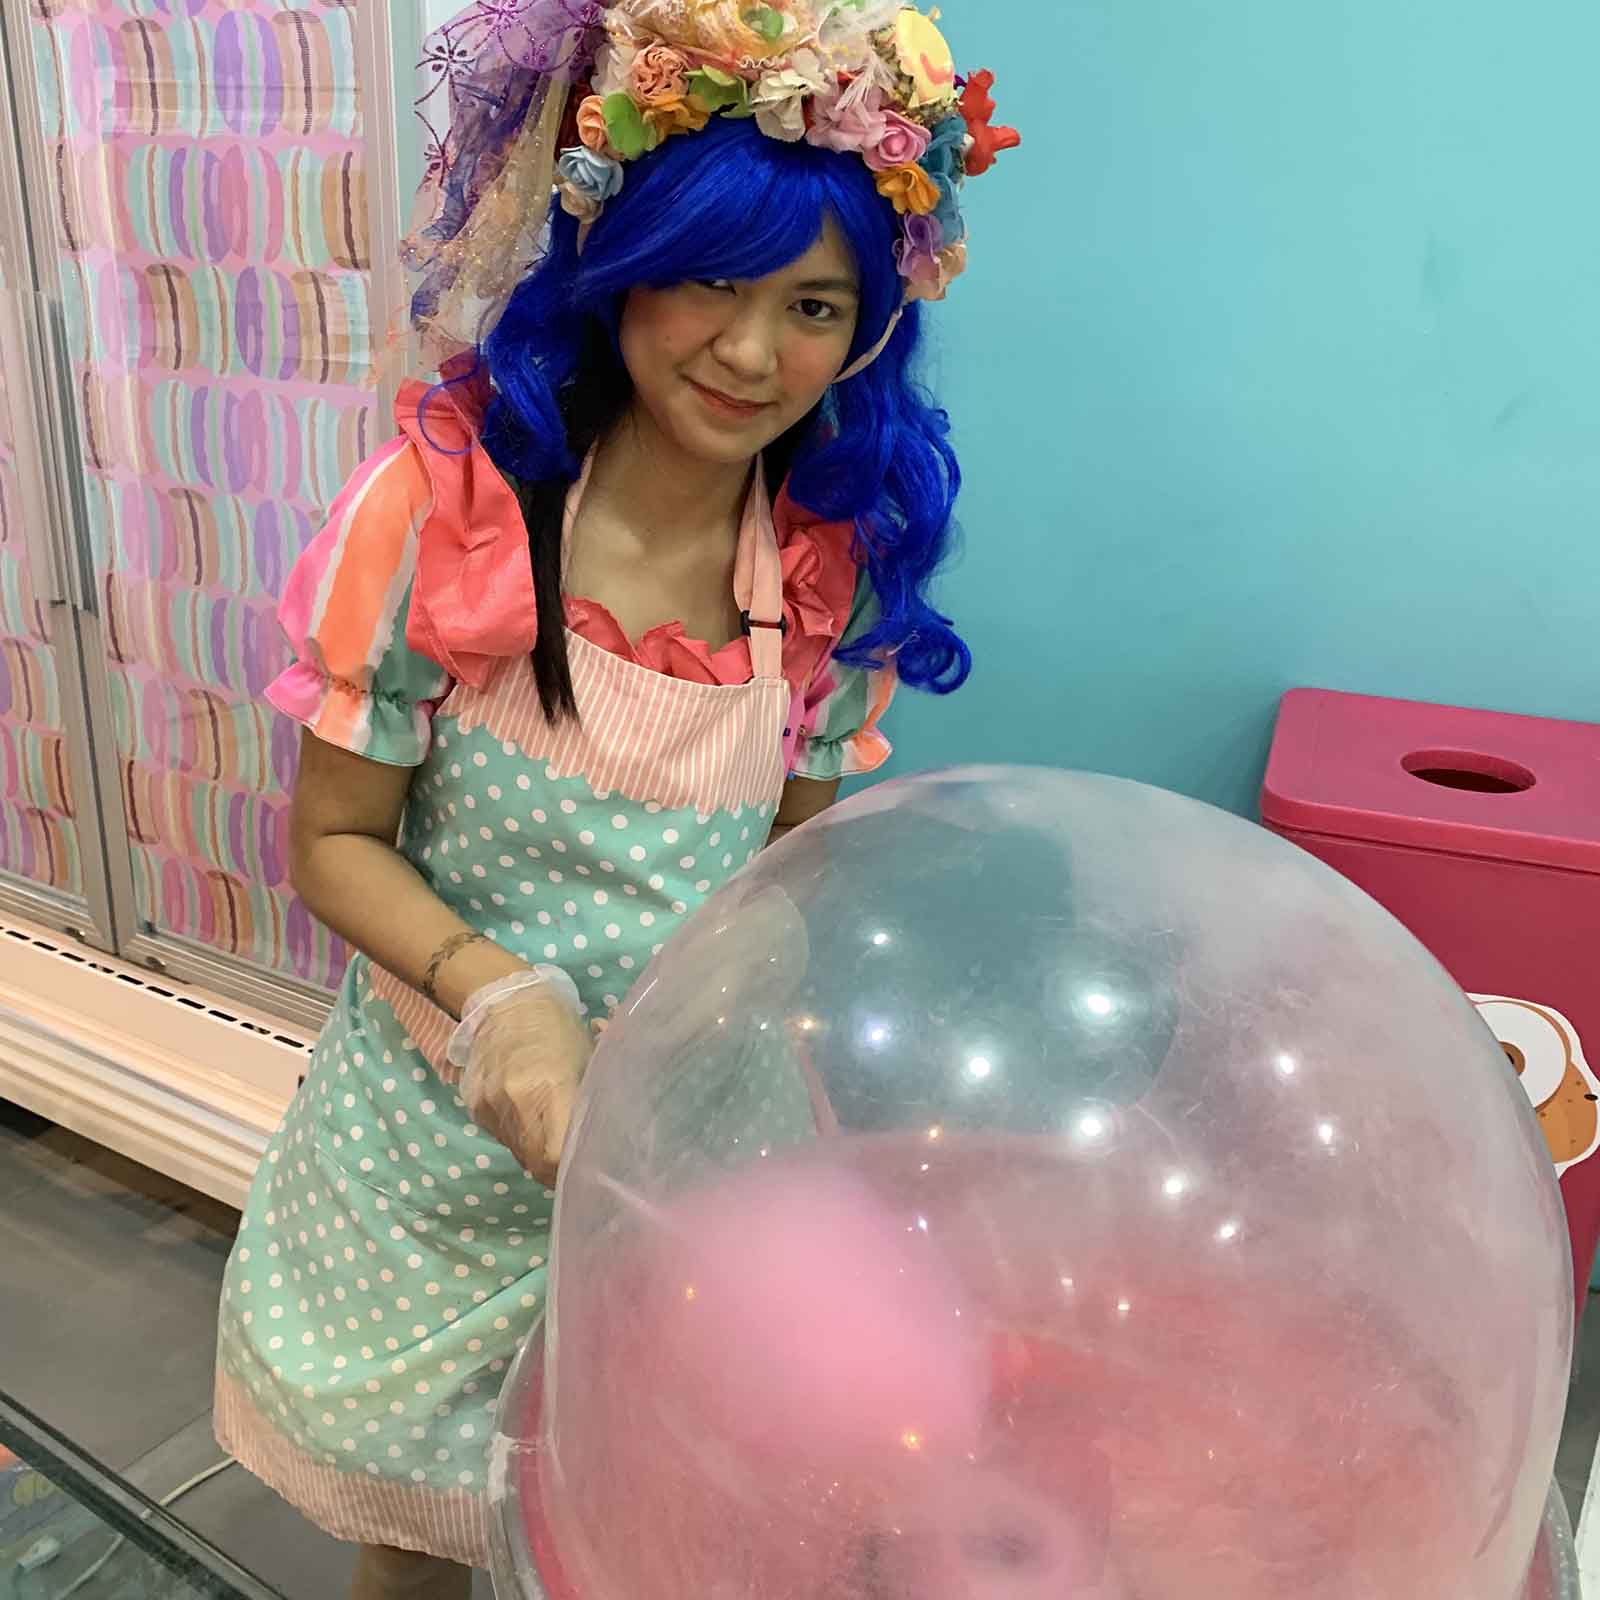 Giant fairy floss at the Dessert Museum, Manila | Manila: The Pearl of the Orient